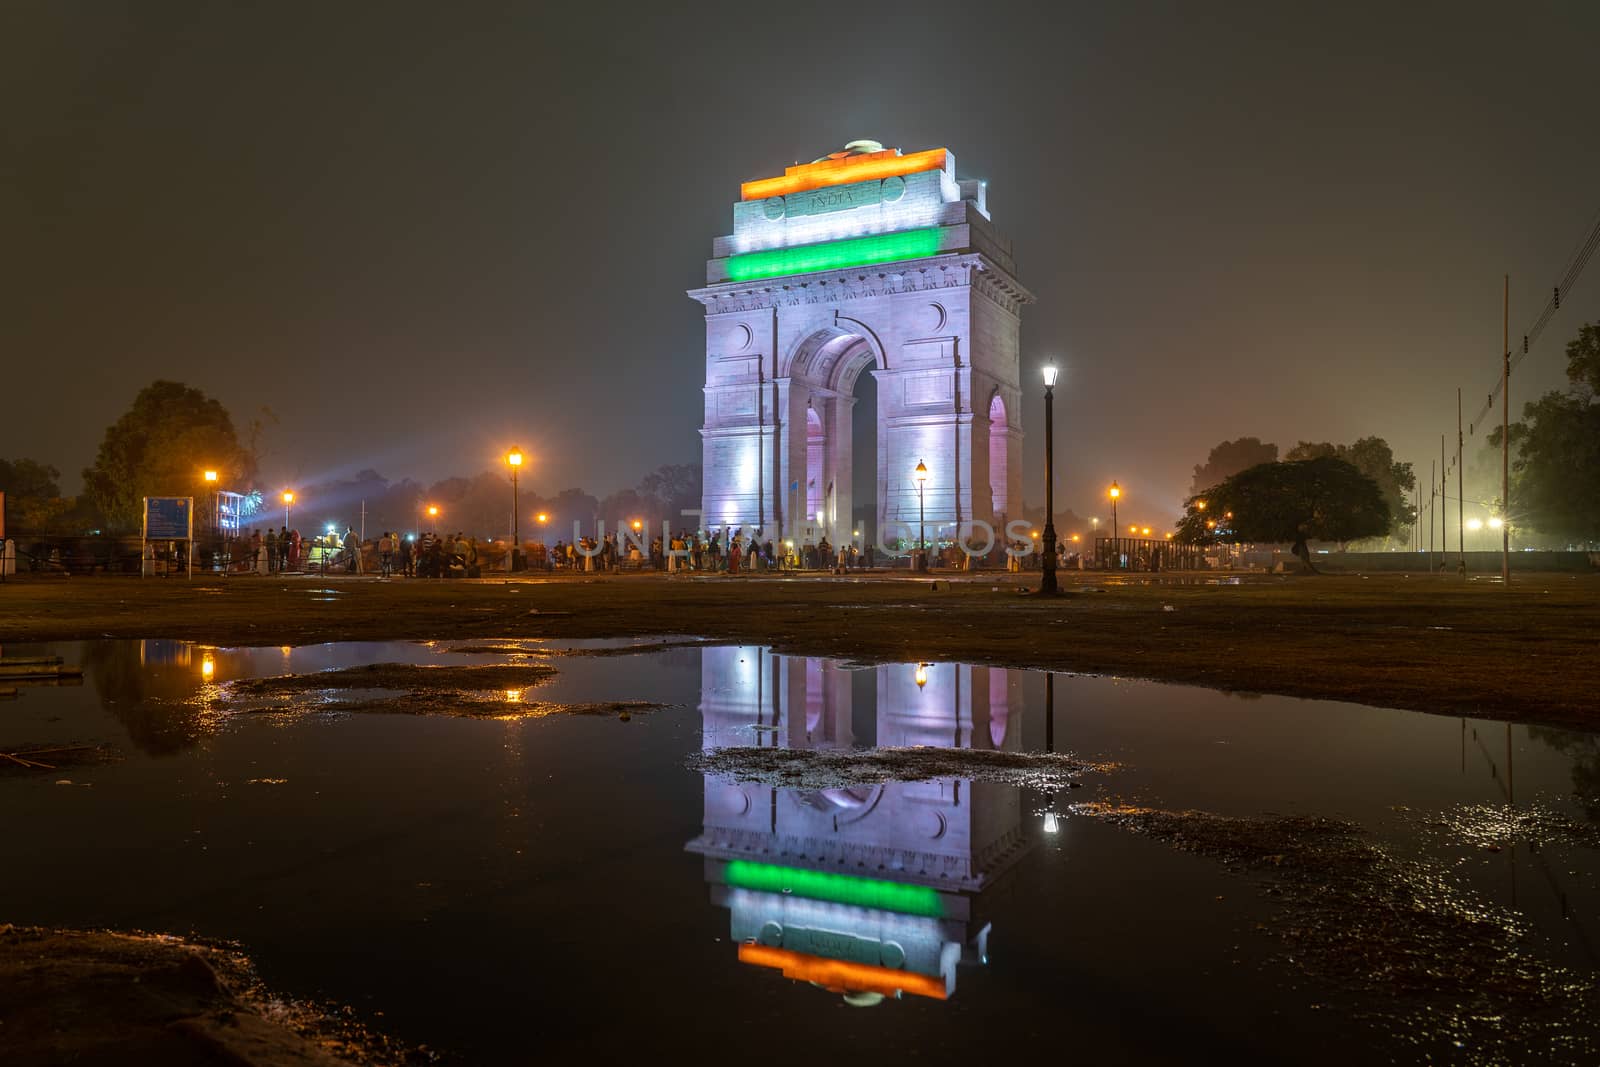 India Gate in Delhi at Night by oliverfoerstner